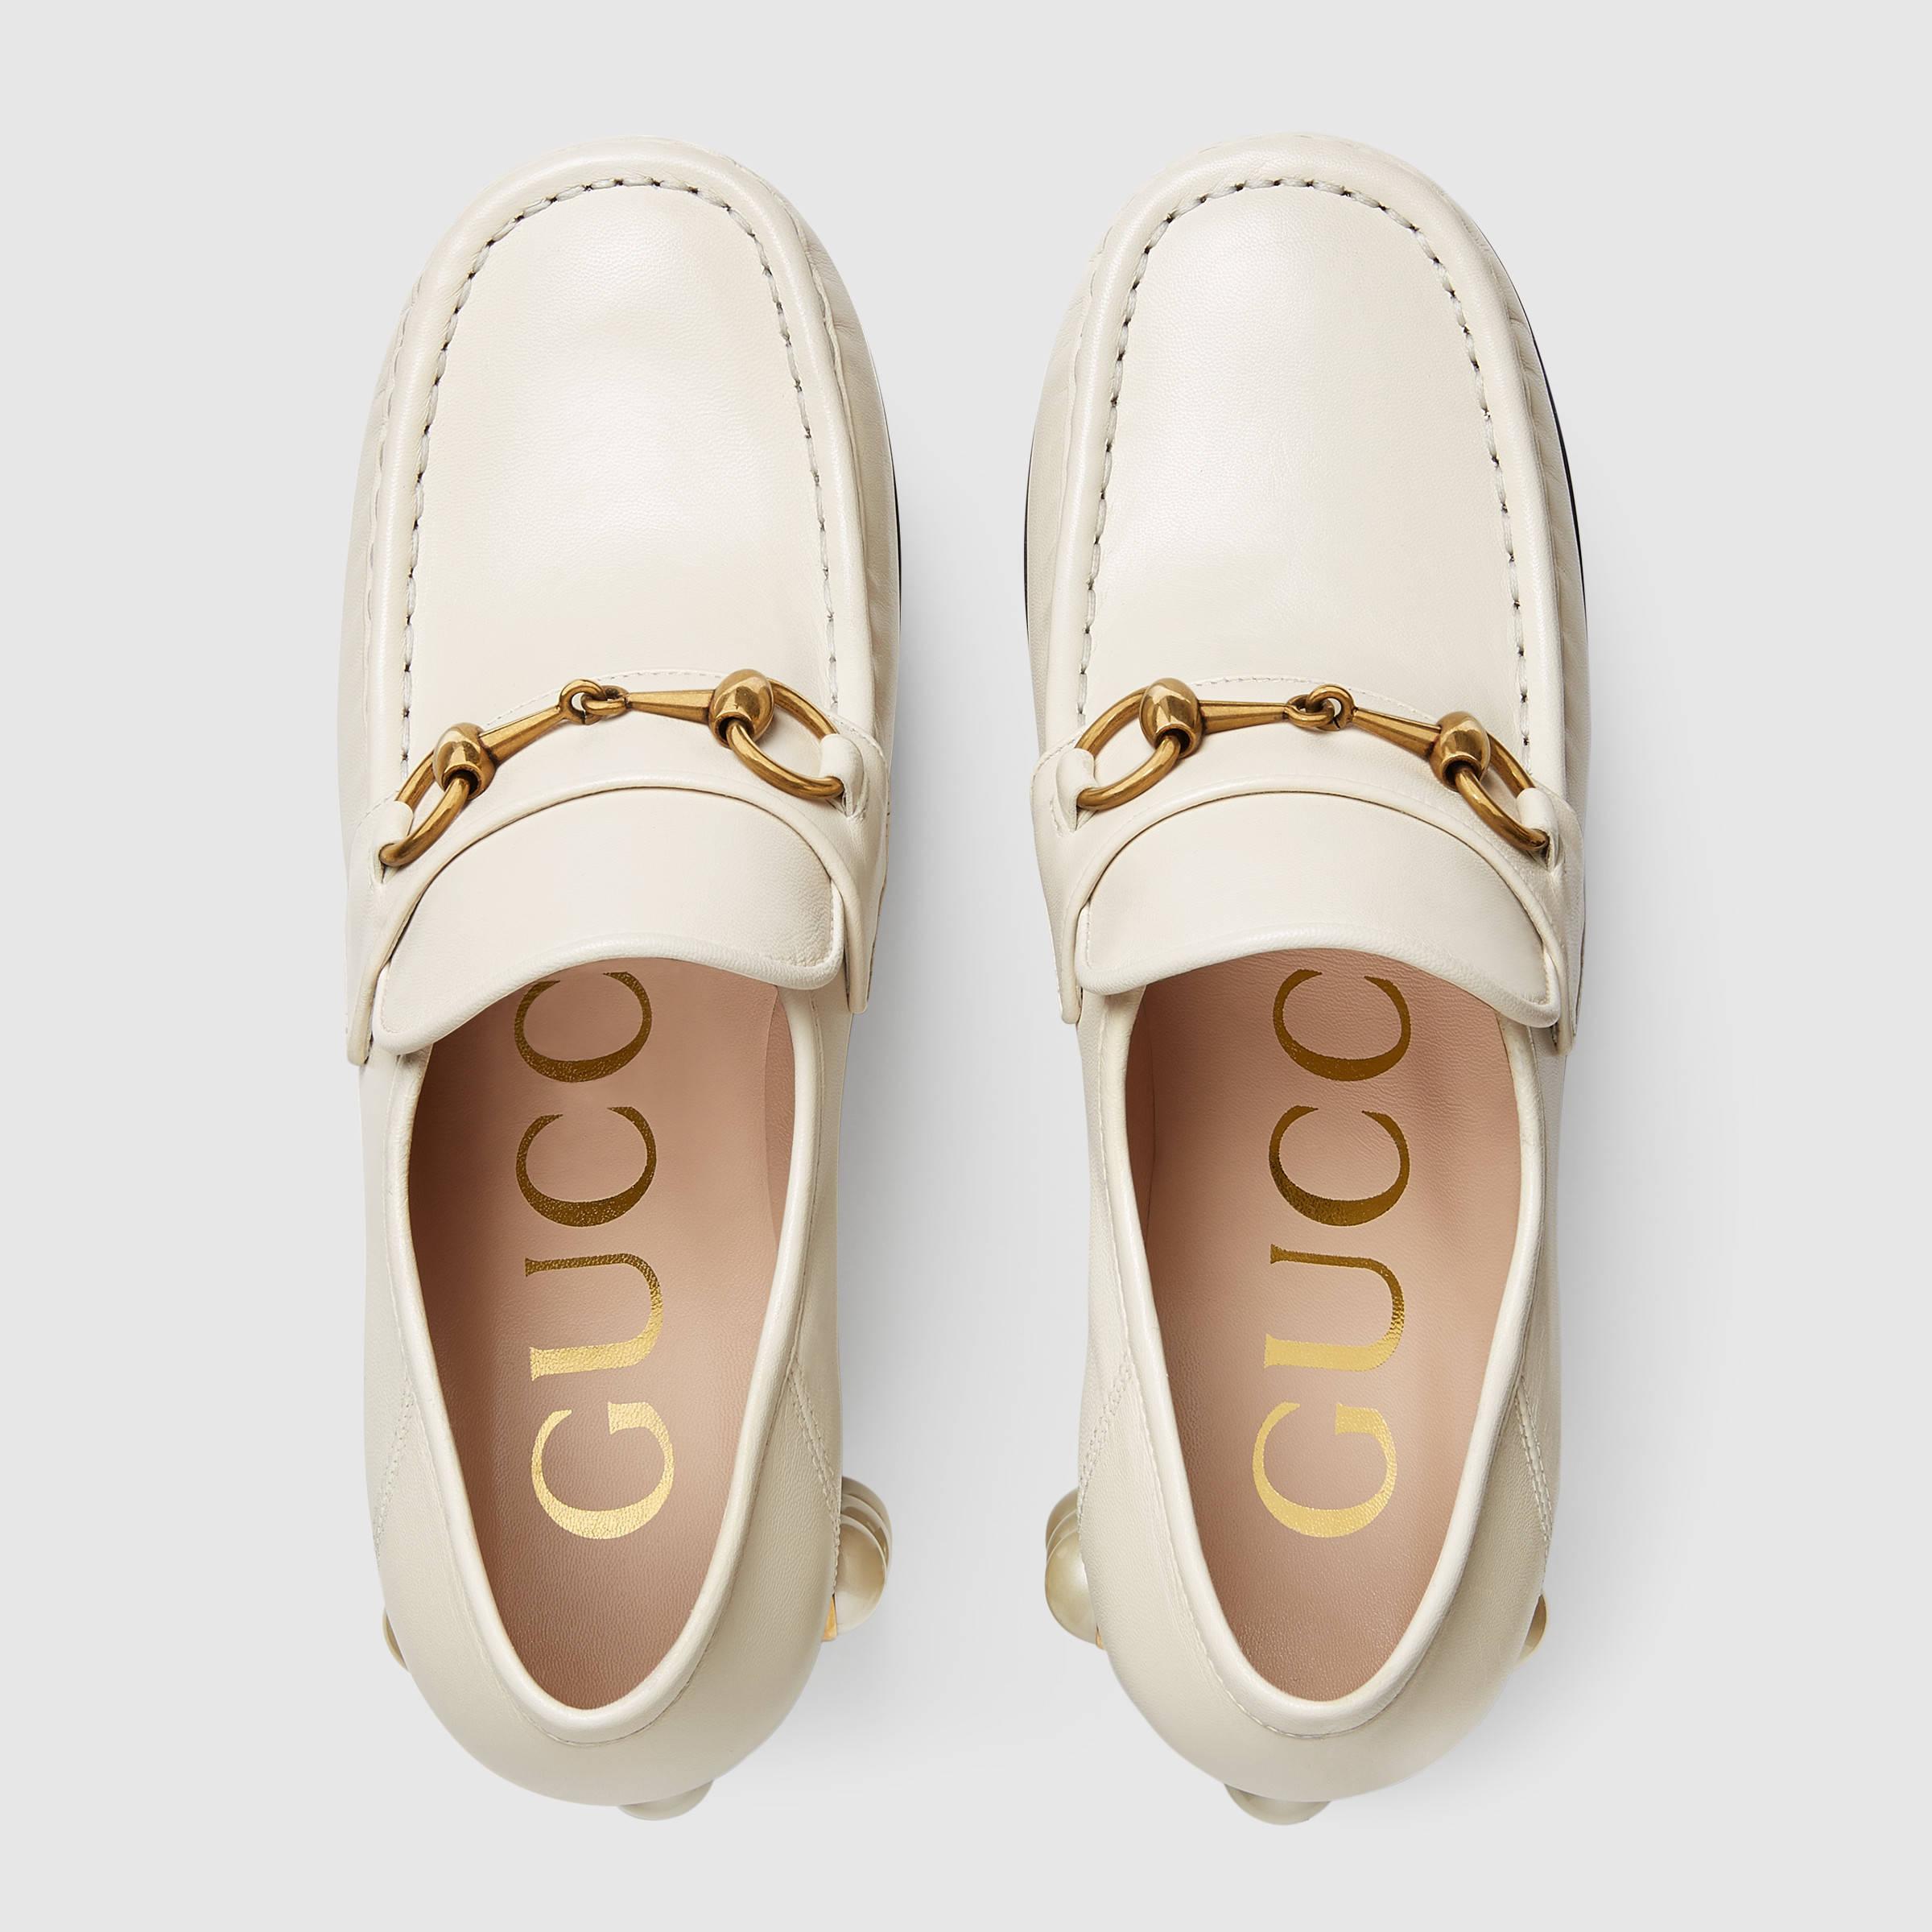 Lyst - Gucci Studded Leather Horsebit Loafers in White